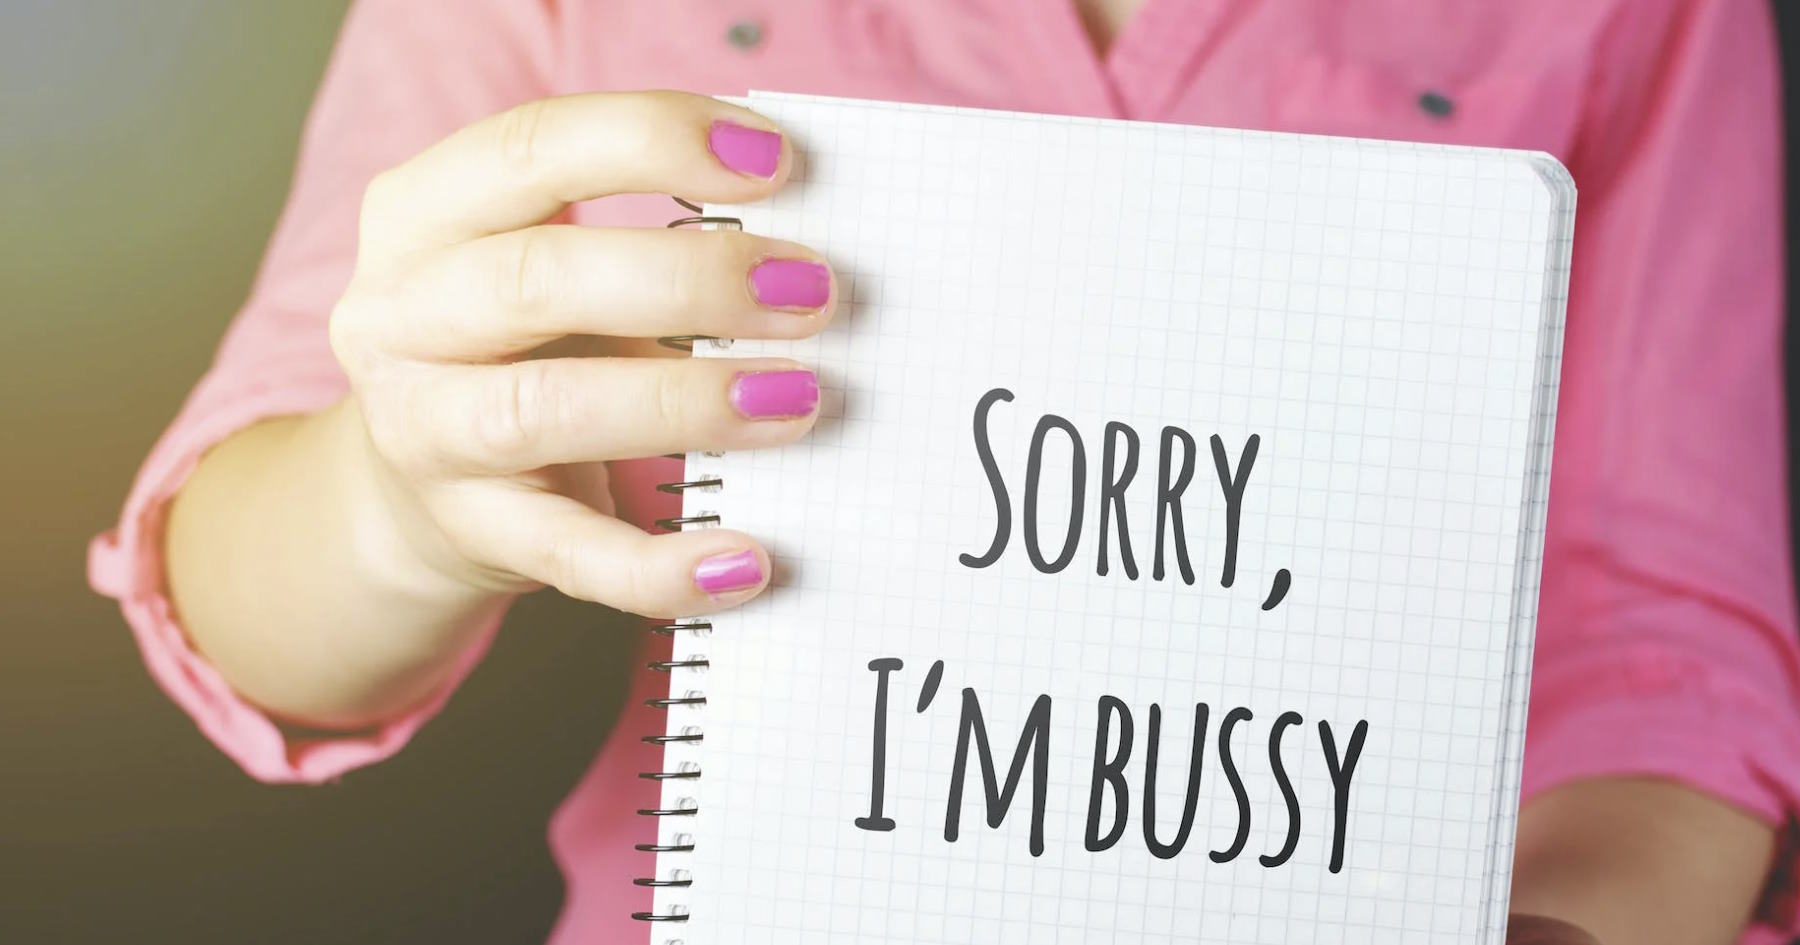 Learn how to write an effective excuse letter that will help you explain your absence or delay in a professional and concise manner. A step-by-step guide with tips and examples.